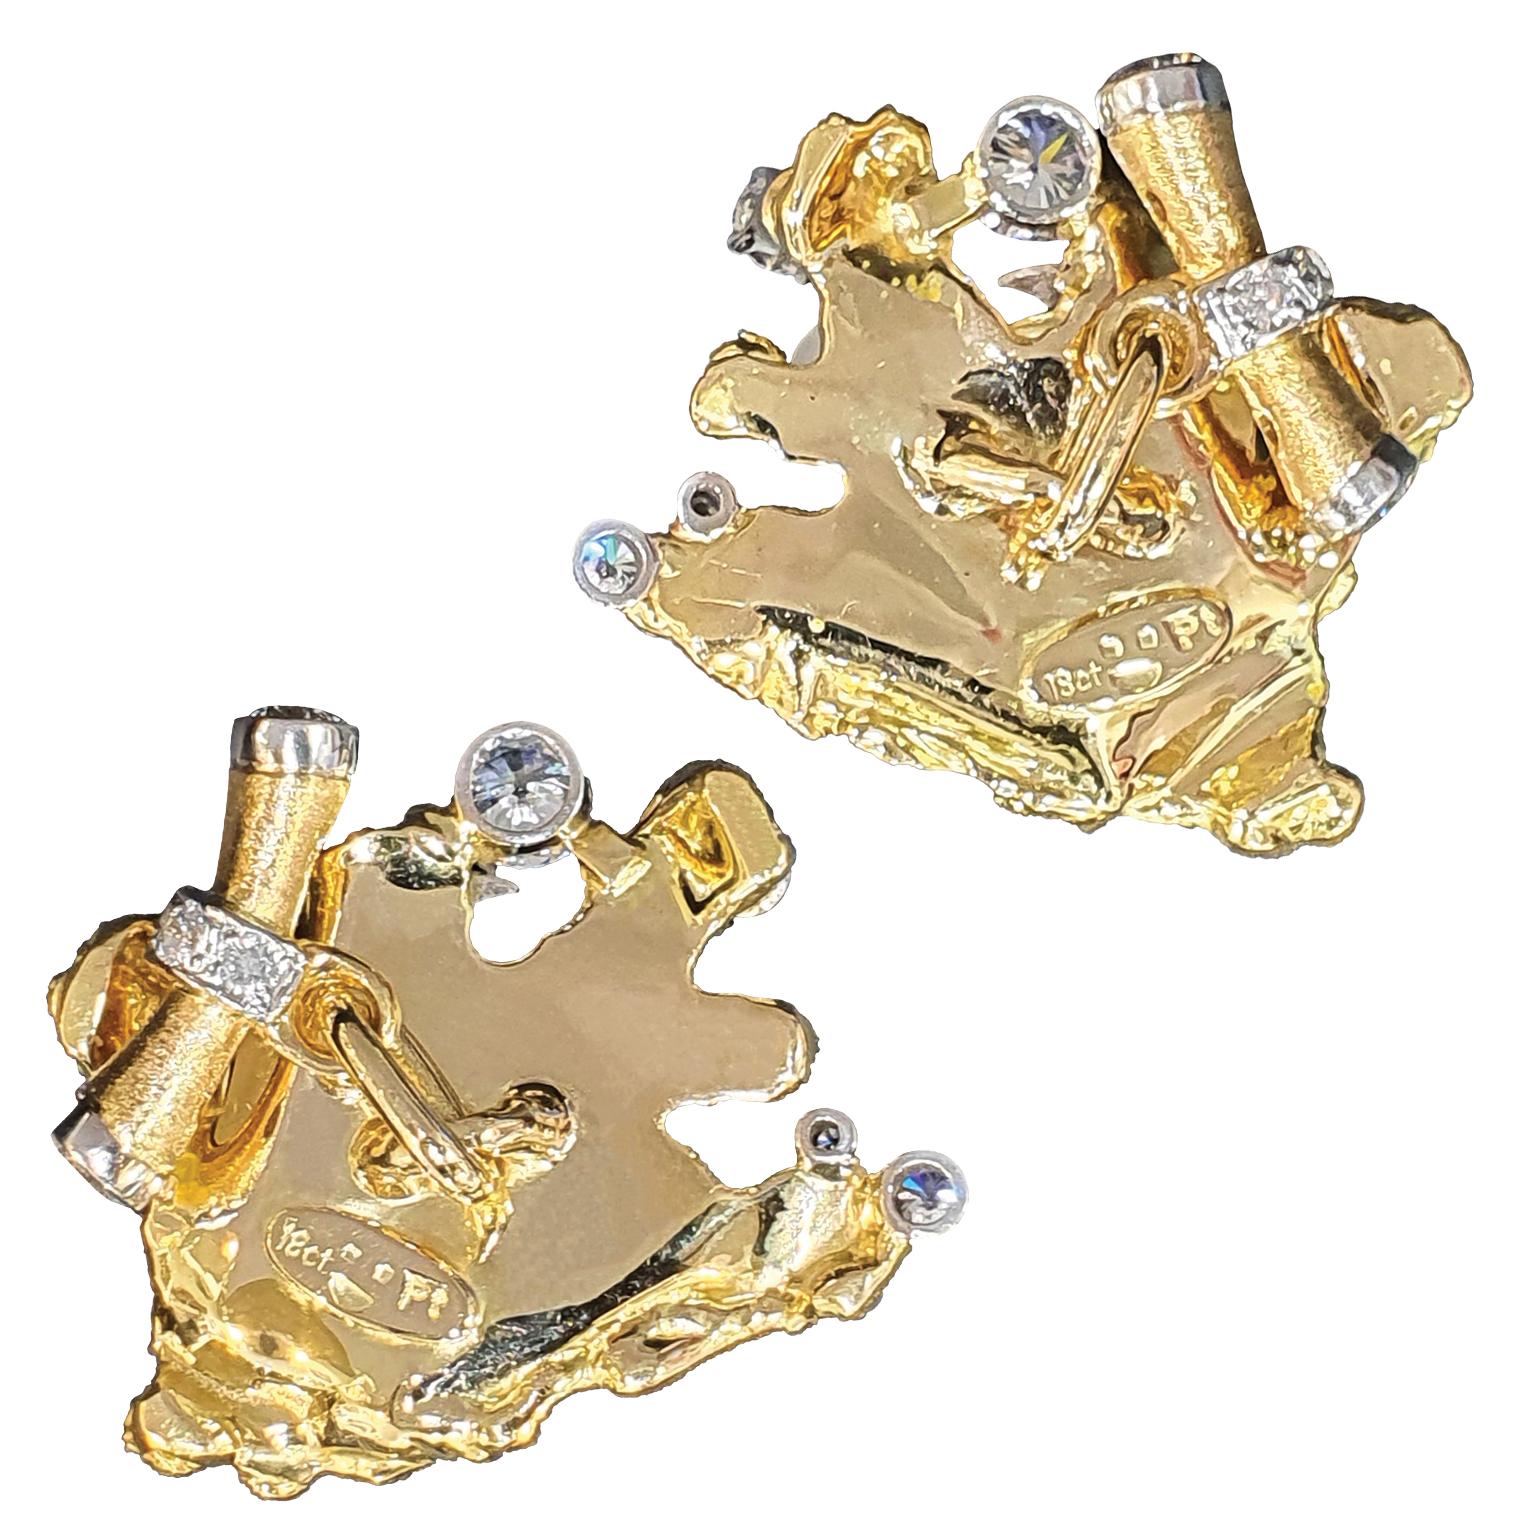 The “Blayzing” cufflinks were designed and hand crafted by multi award-winning jeweller Paul Amey in Australia. Stamped with his registered makers mark and precious metal marks. “Blayzing” were designed and completed with over 60 hours of labour and